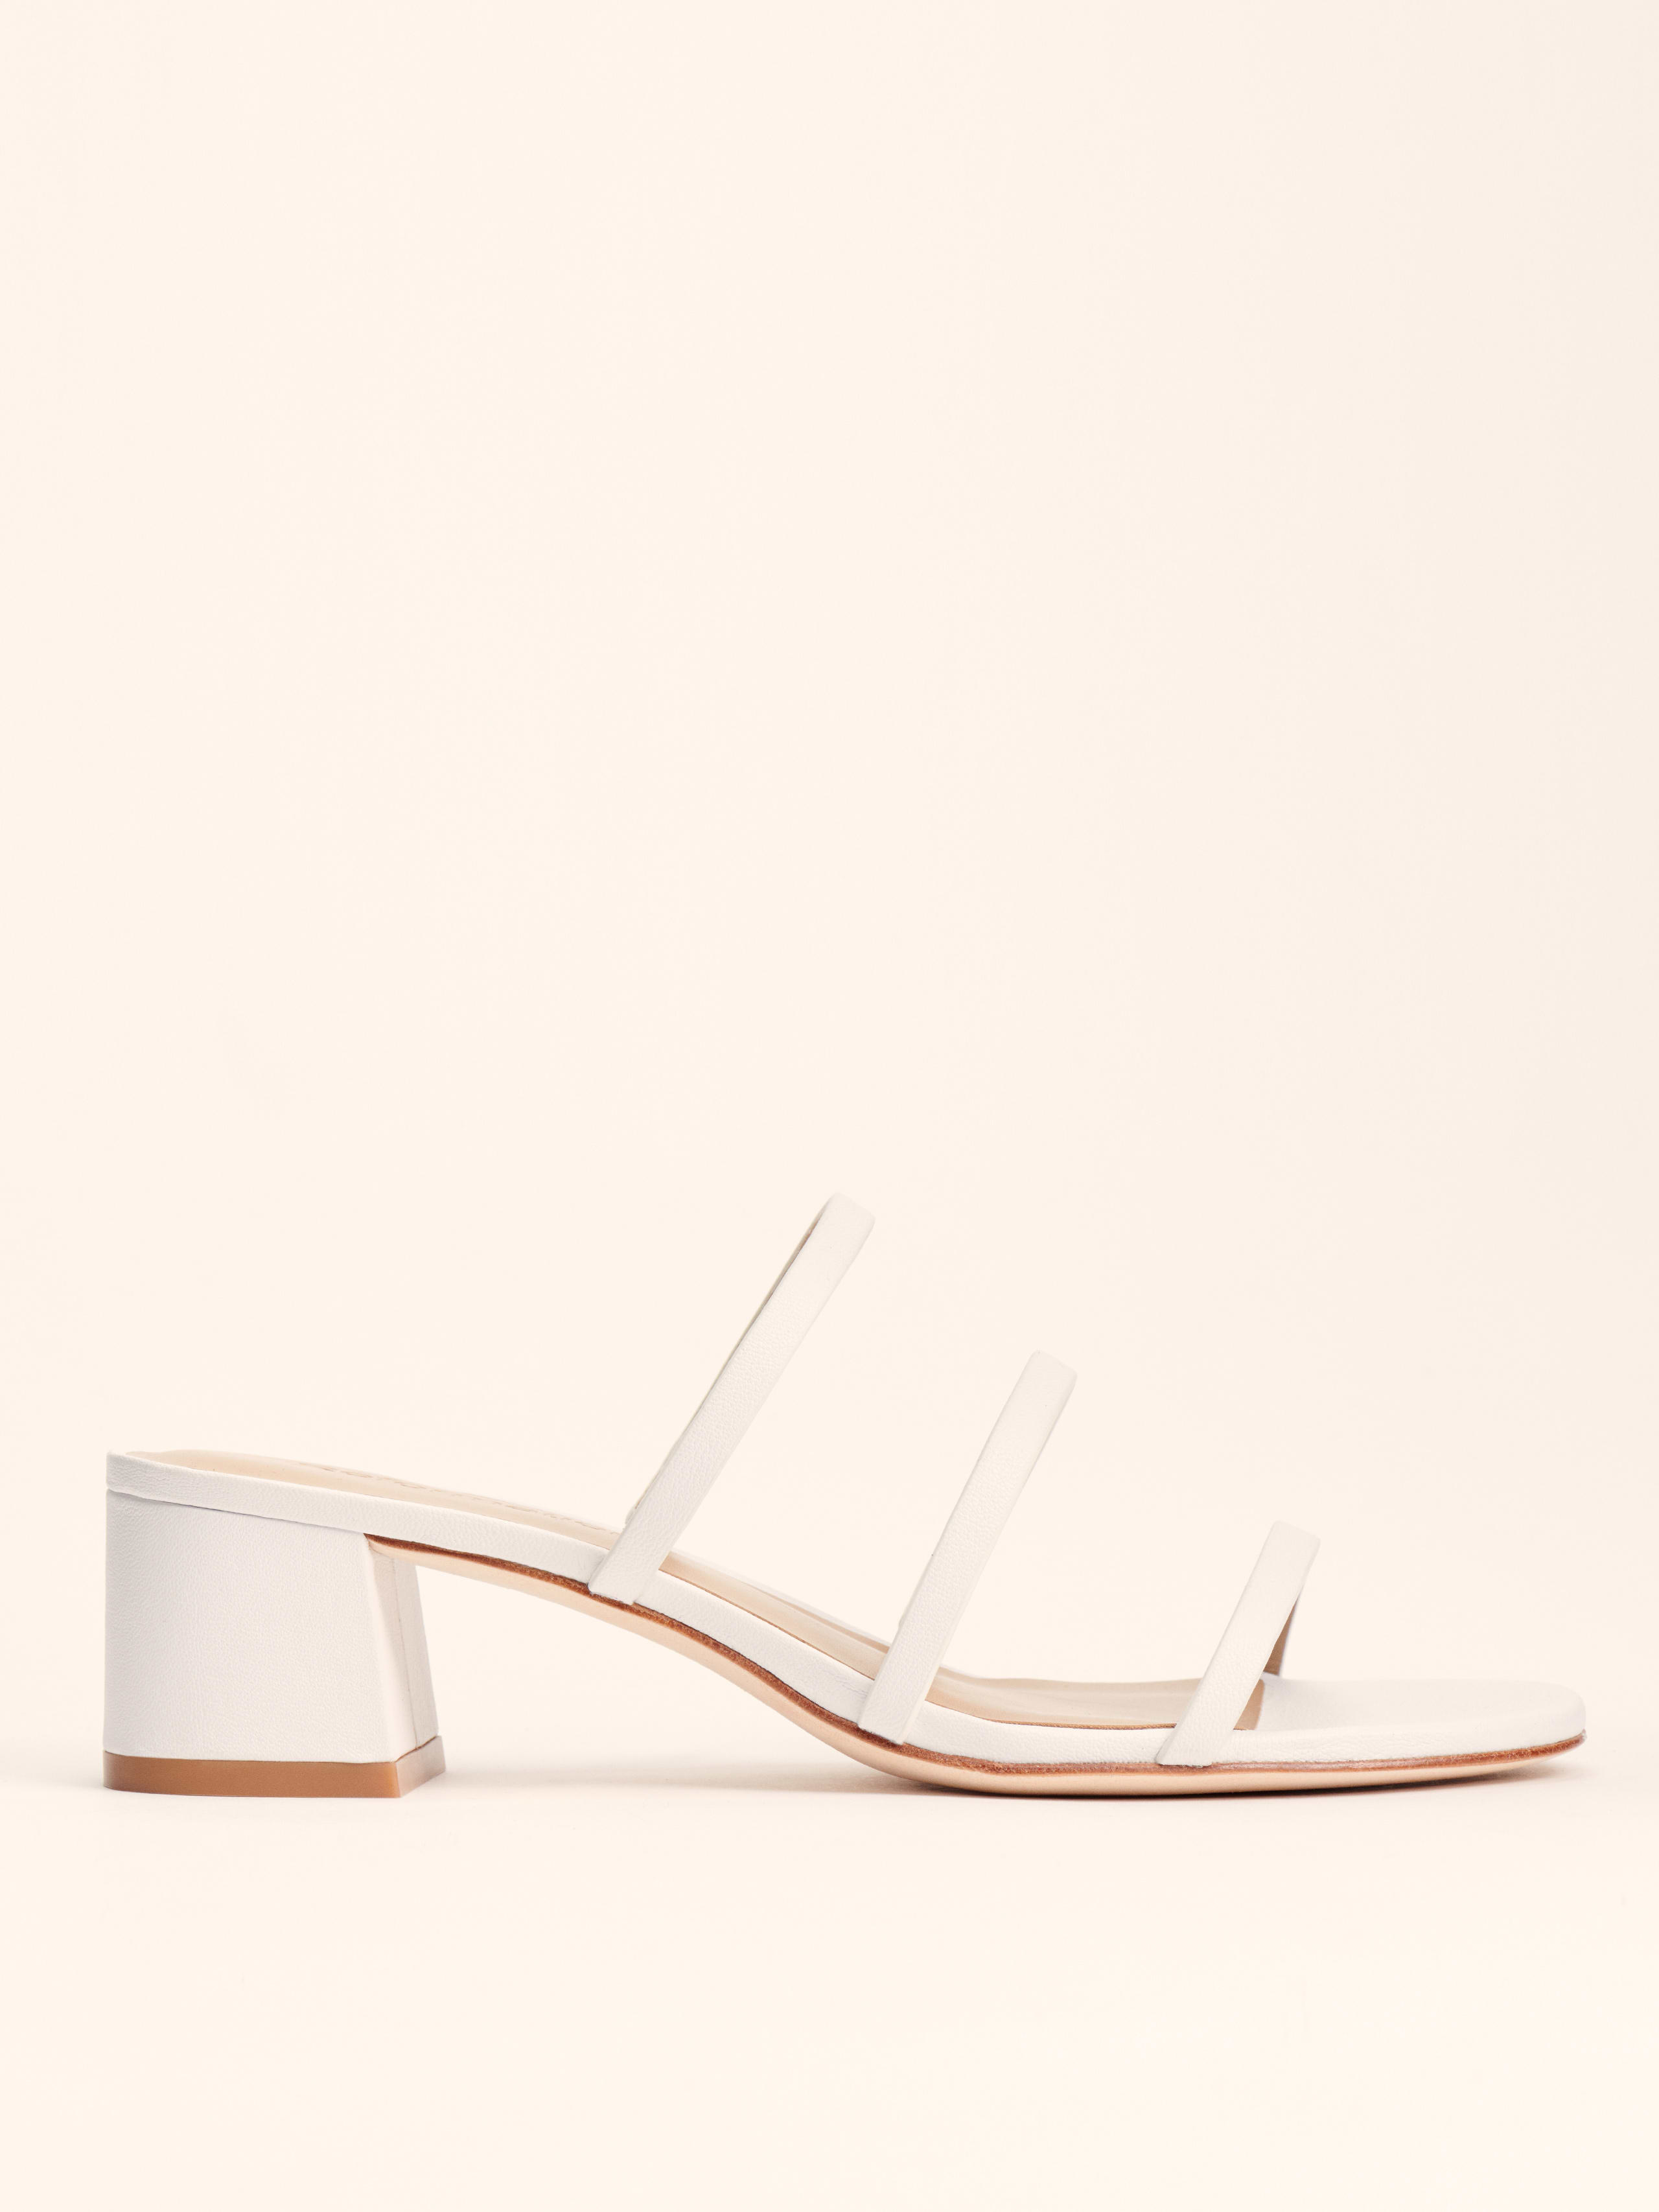 Leather sandal Reformation White size 6.5 US in Leather - 33795628